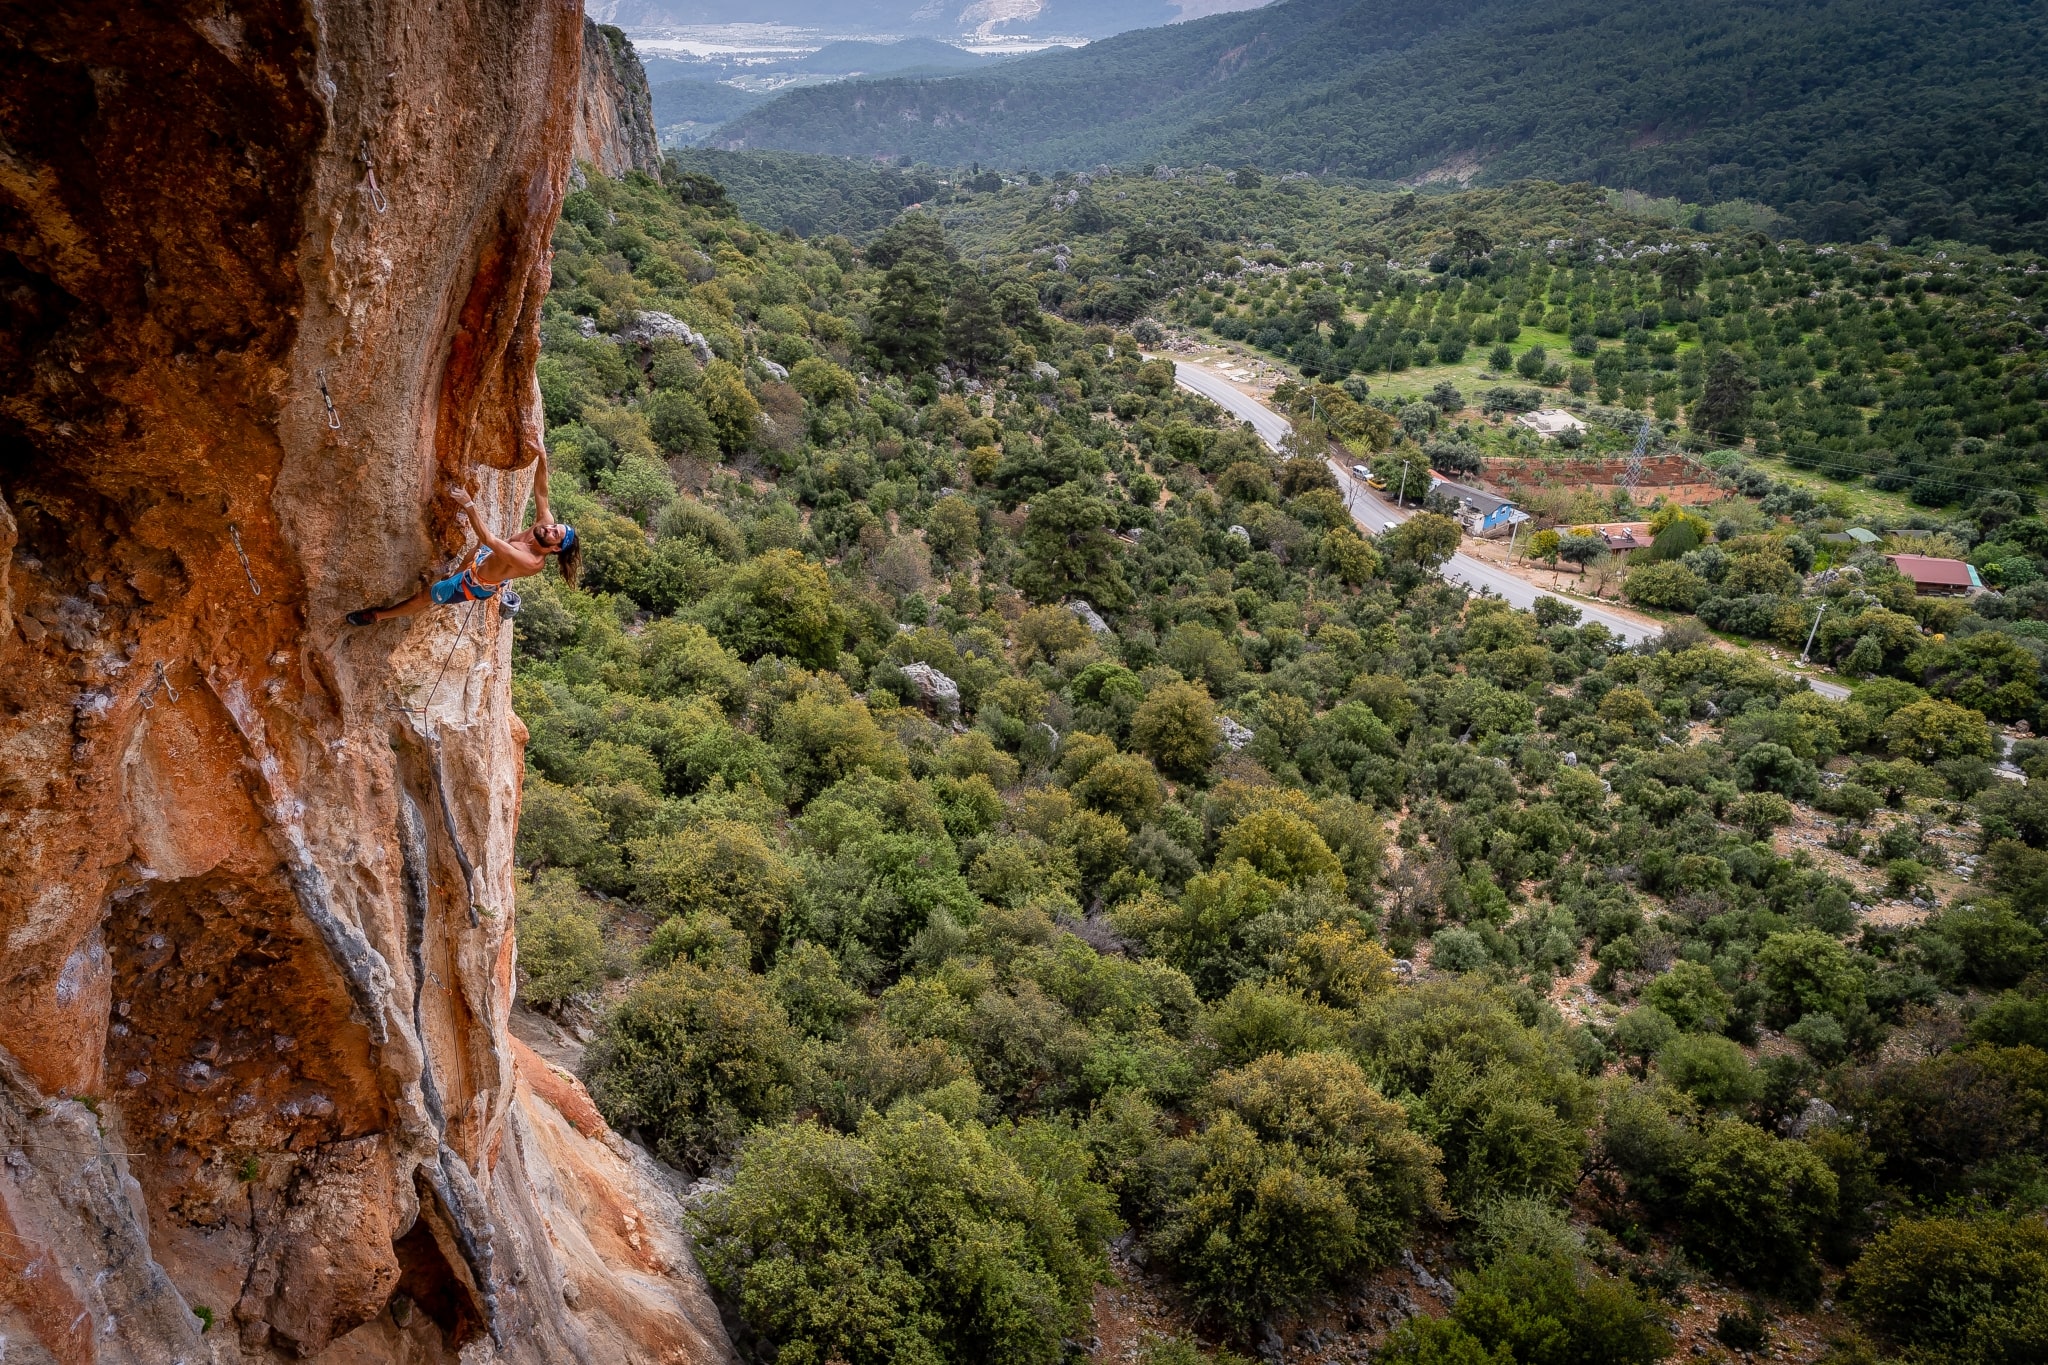 A person rock climbing in Geyikbayiri, Turkey with the valley behind him